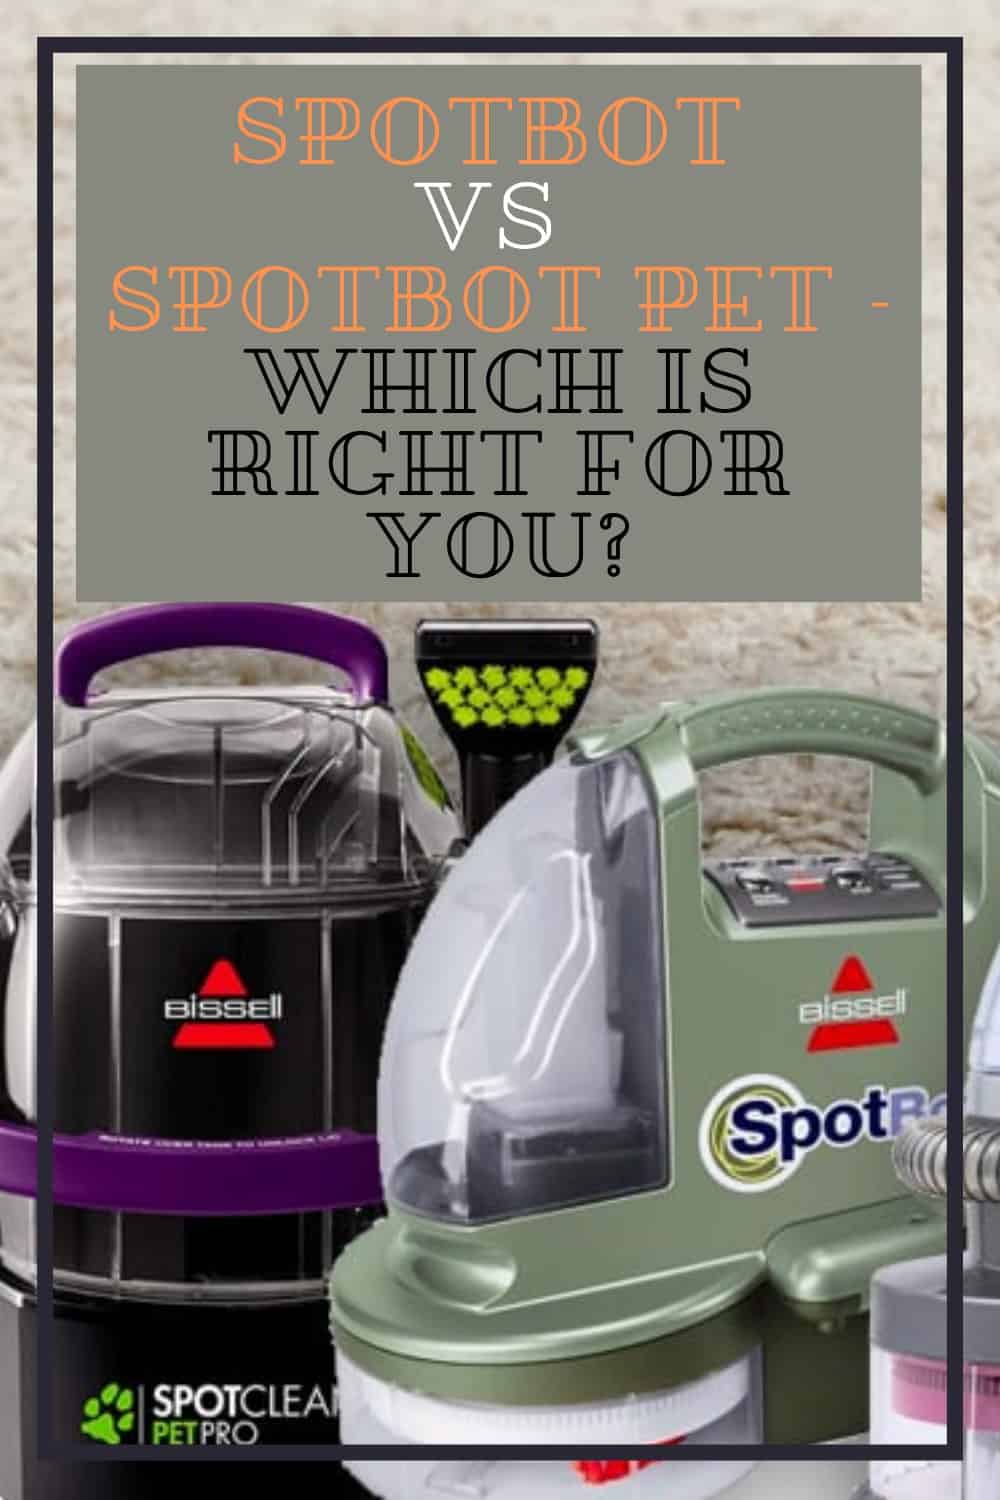 SpotBot vs SpotBot Pet which is better?